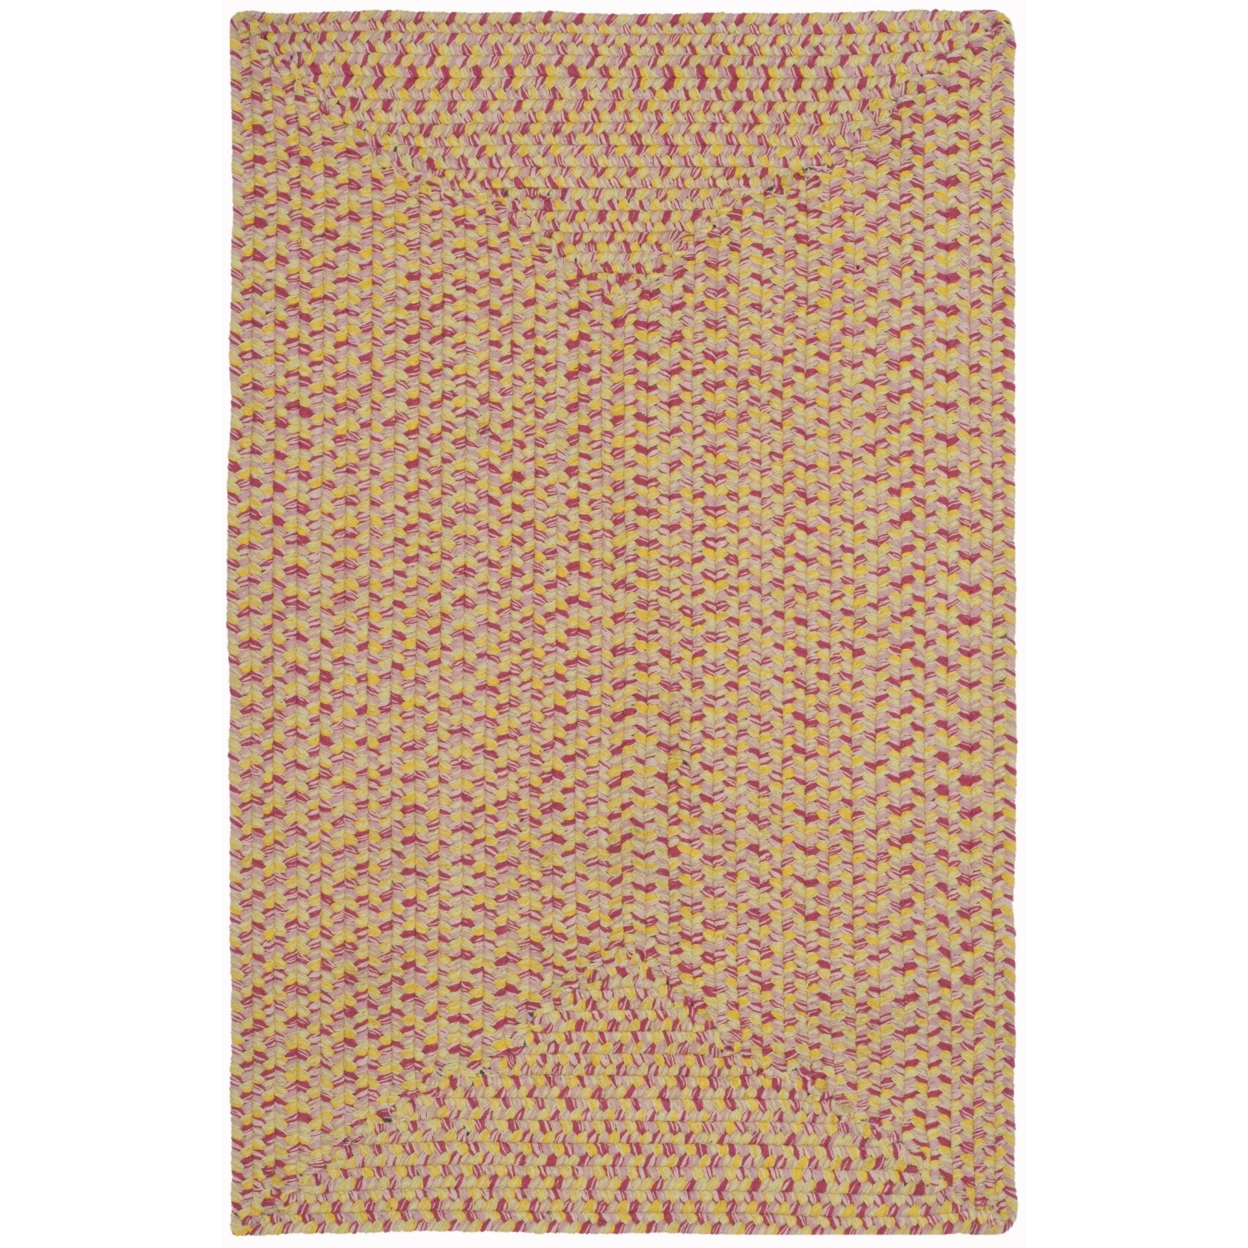 SAFAVIEH Braided Collection BRD164A Handwoven Multi Rug - 5' X 8' Oval